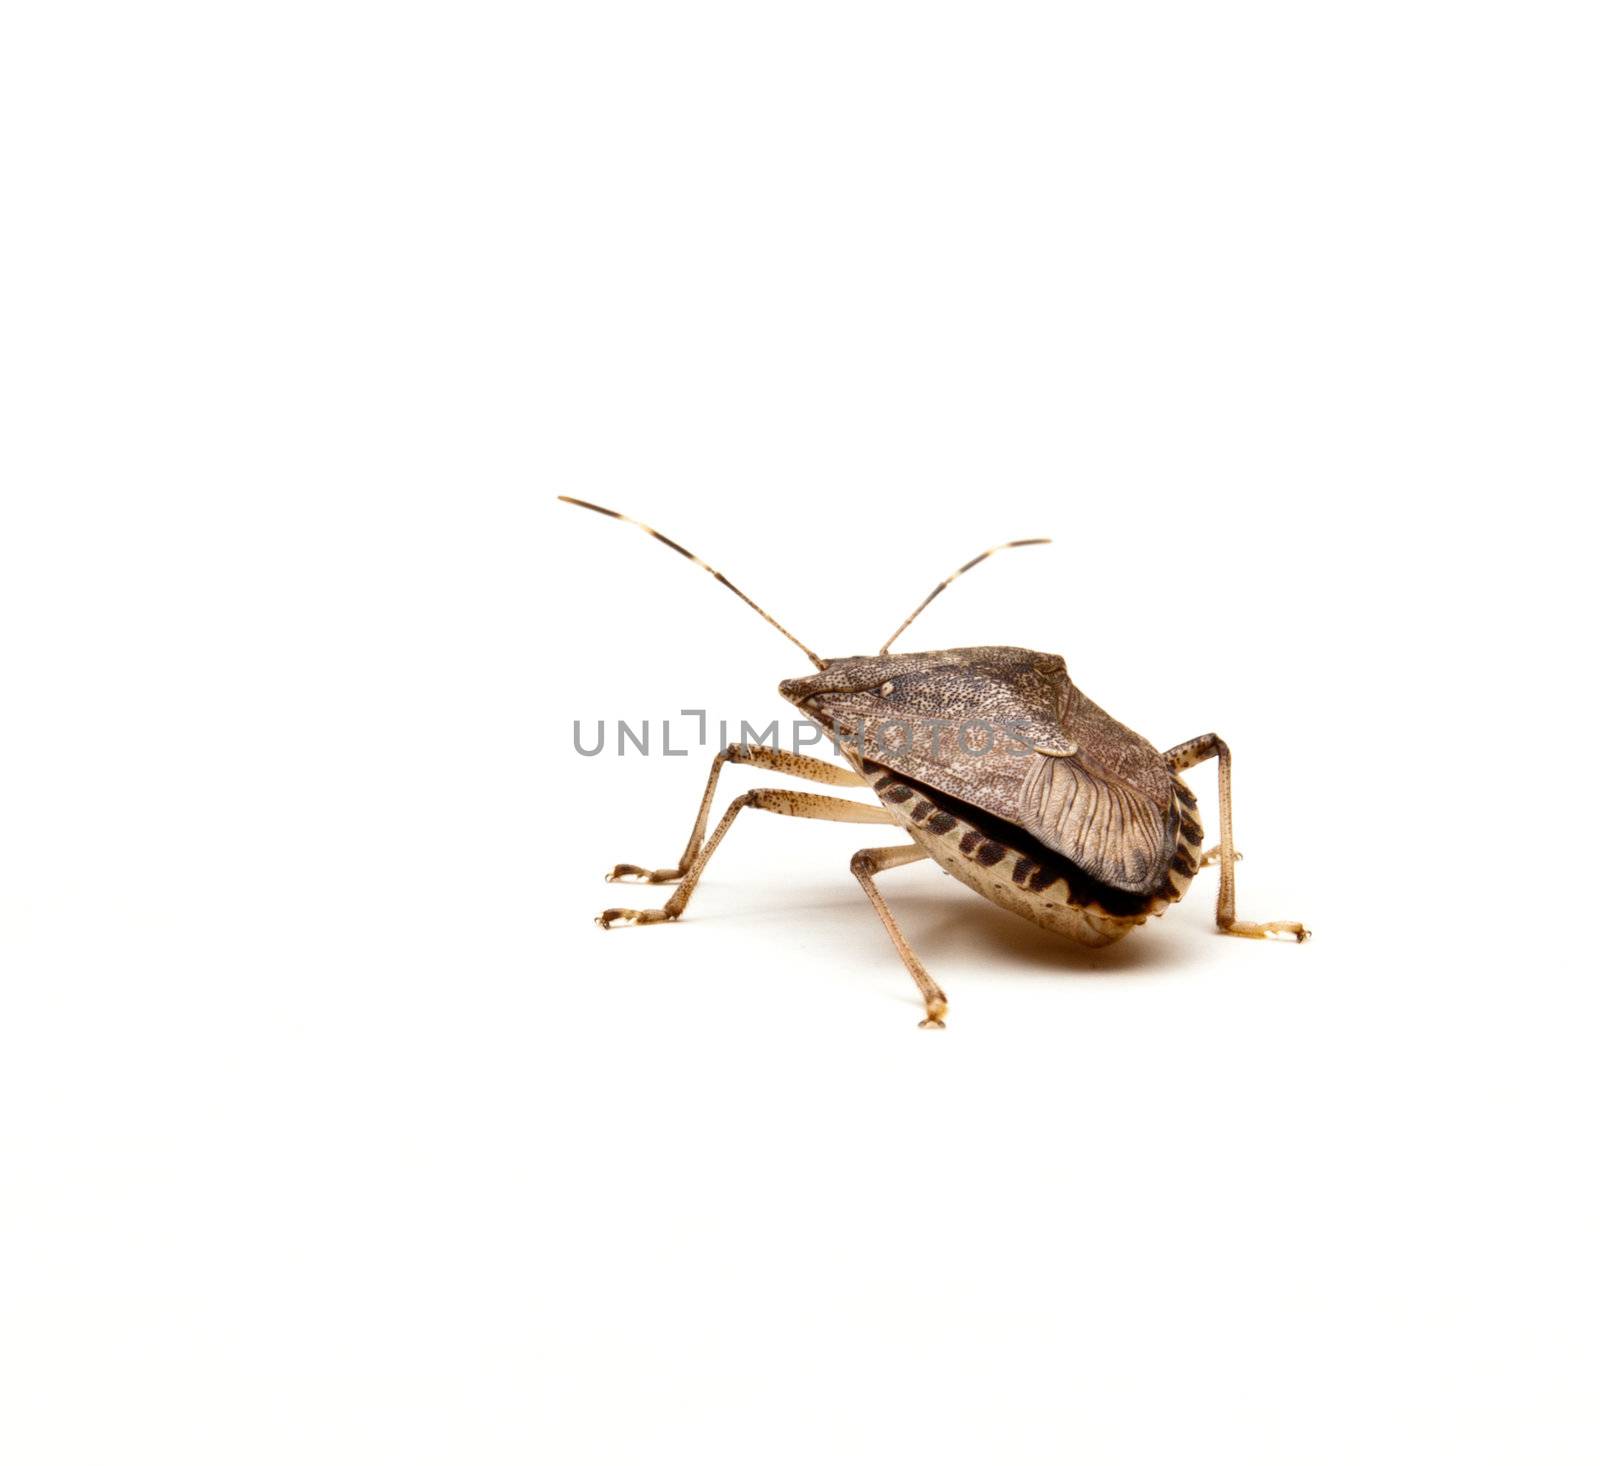 Brown Marmorated Stink Bug or Shield Bug isolated against white background